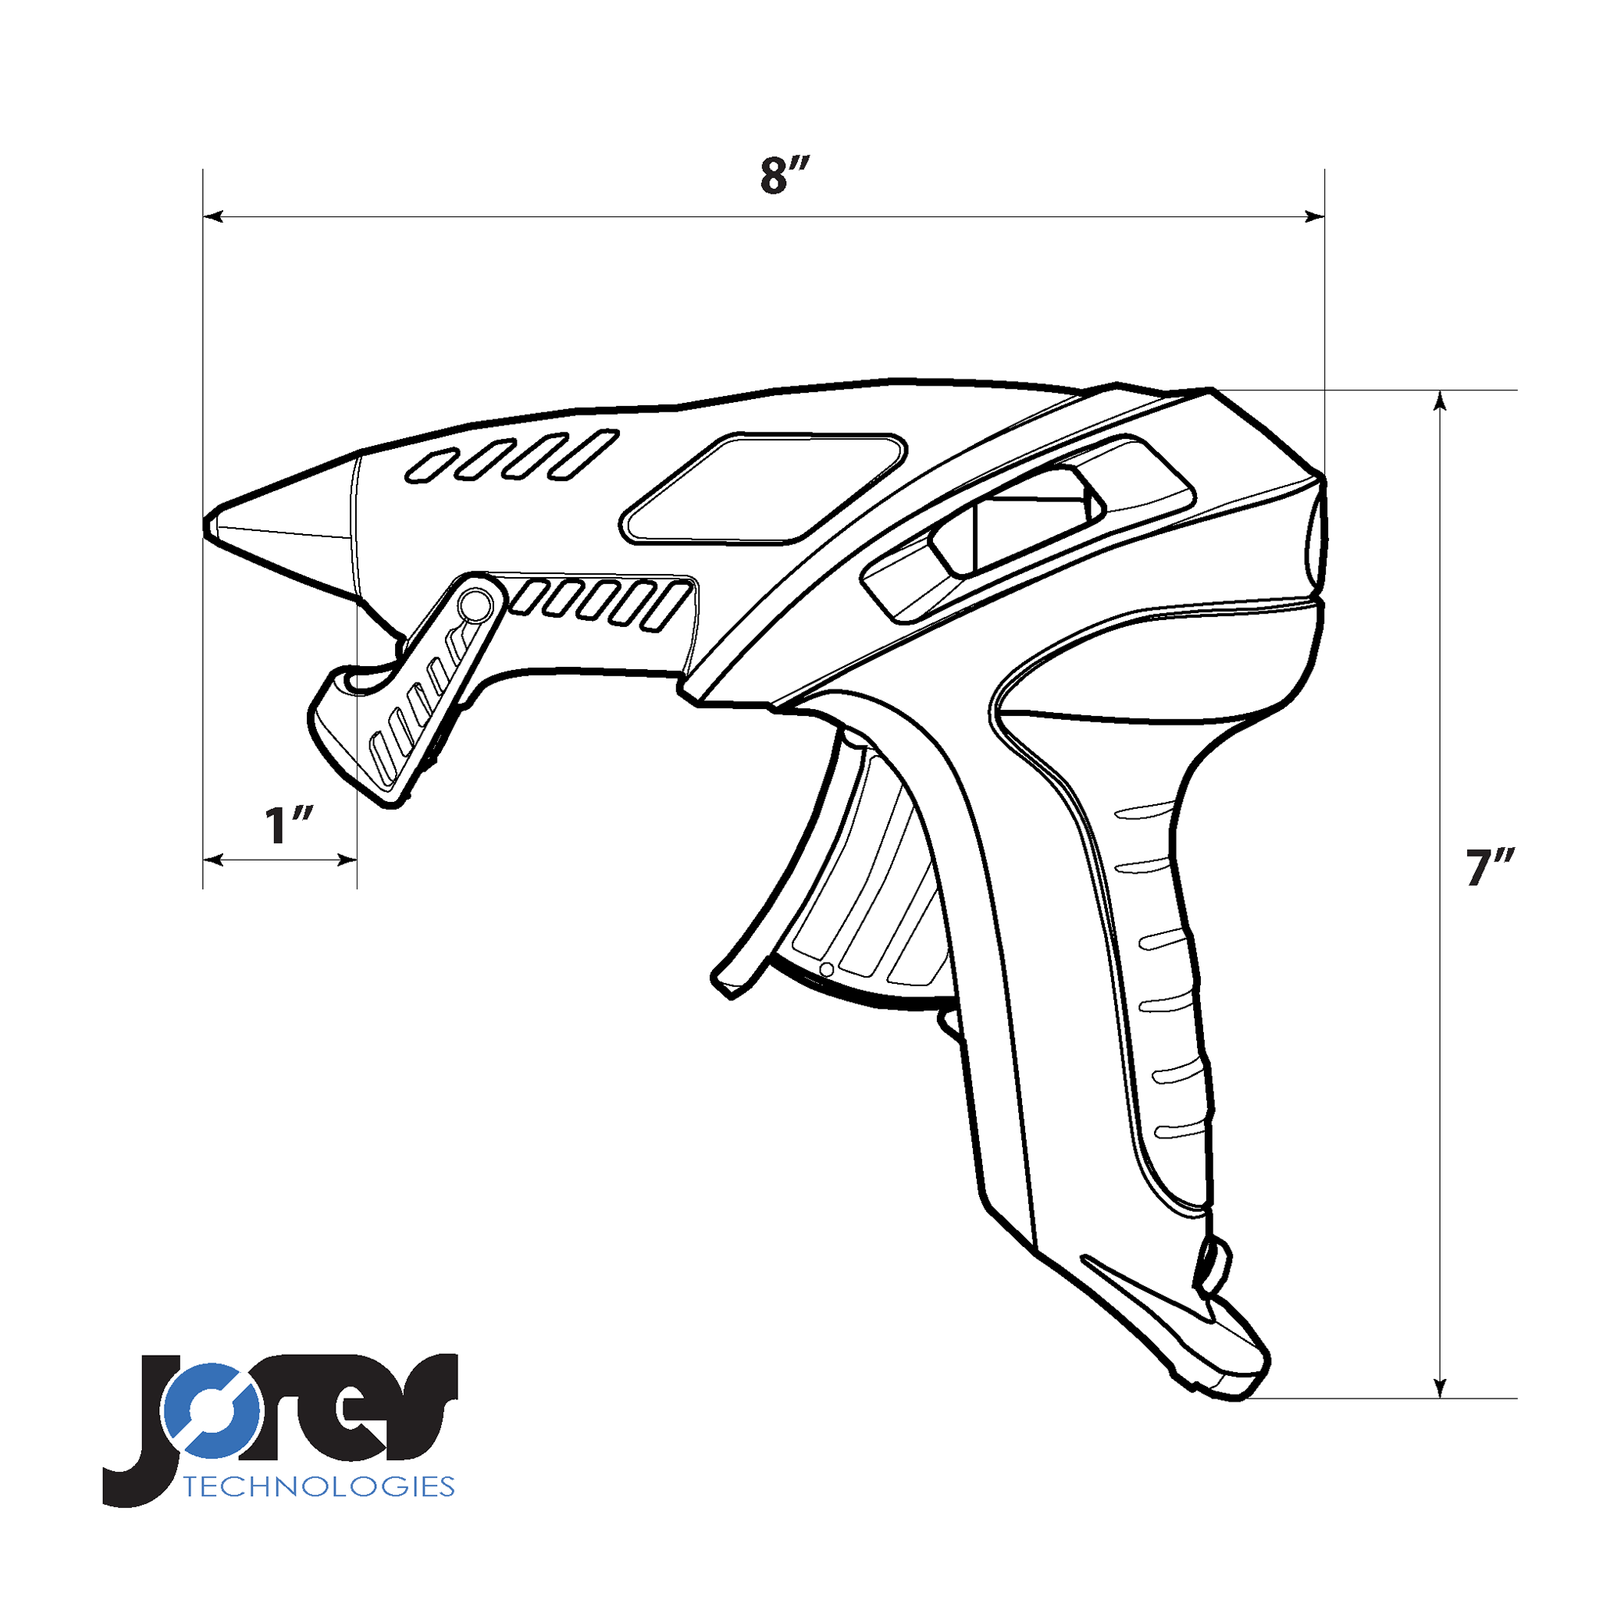 black and white Infographic of a glue gun sketch showing measurements with jores technologies logo on bottom left 8 x 7 inches